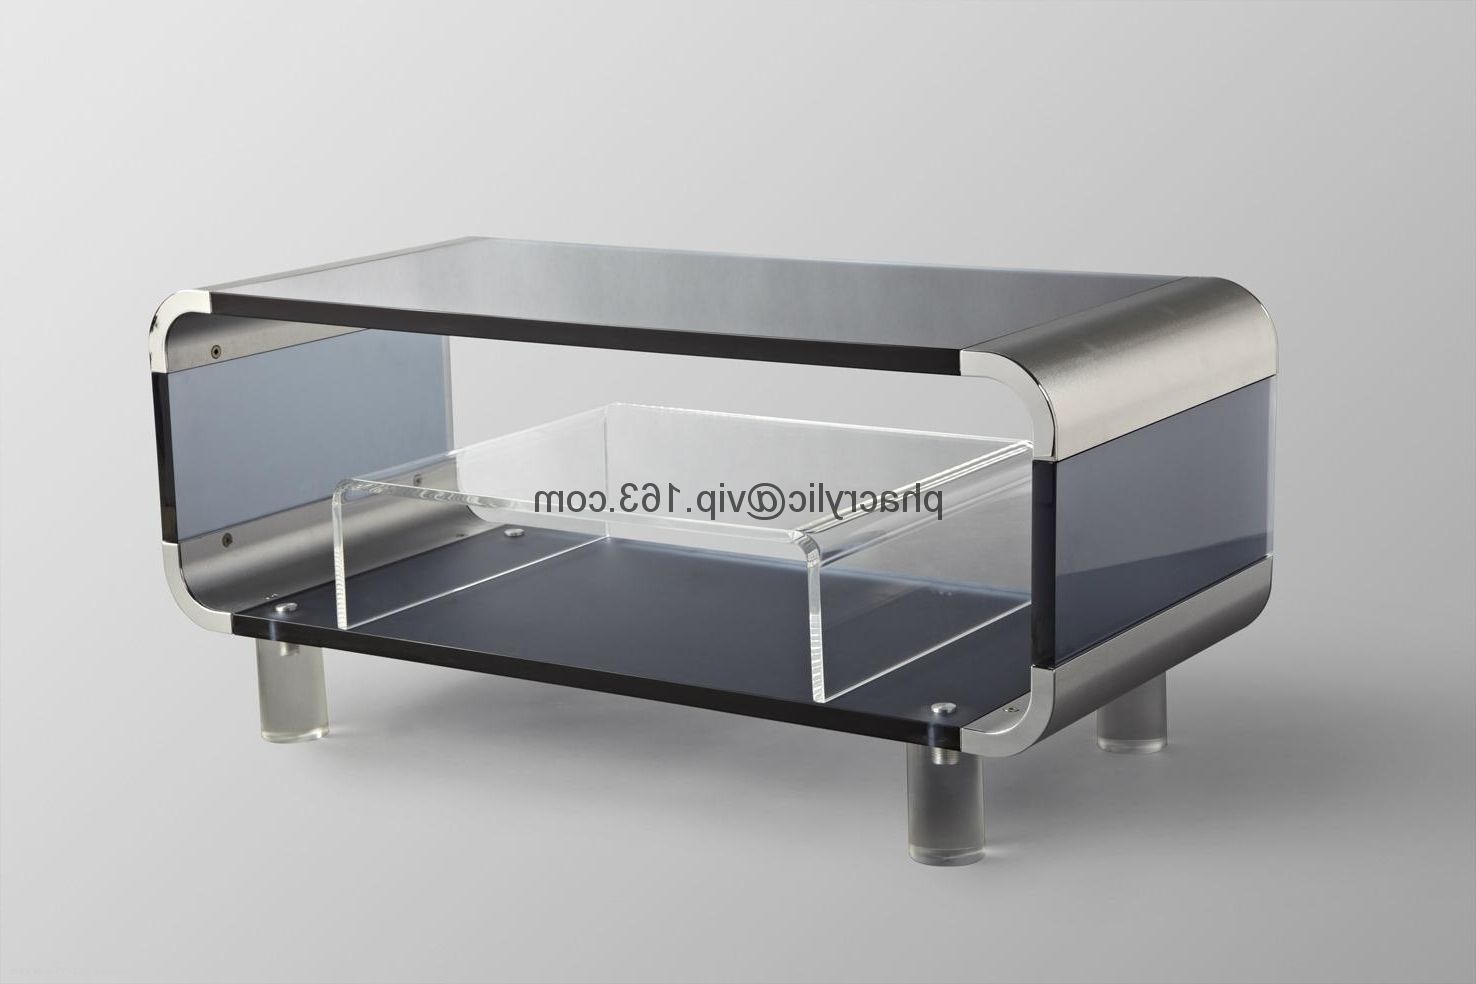 Acrylic Tv Stands Throughout Most Current Acrylic Tv Stand, Plexiglass Tv Cabinet, Lucite Tv Stand – Tv802 (Photo 1 of 20)